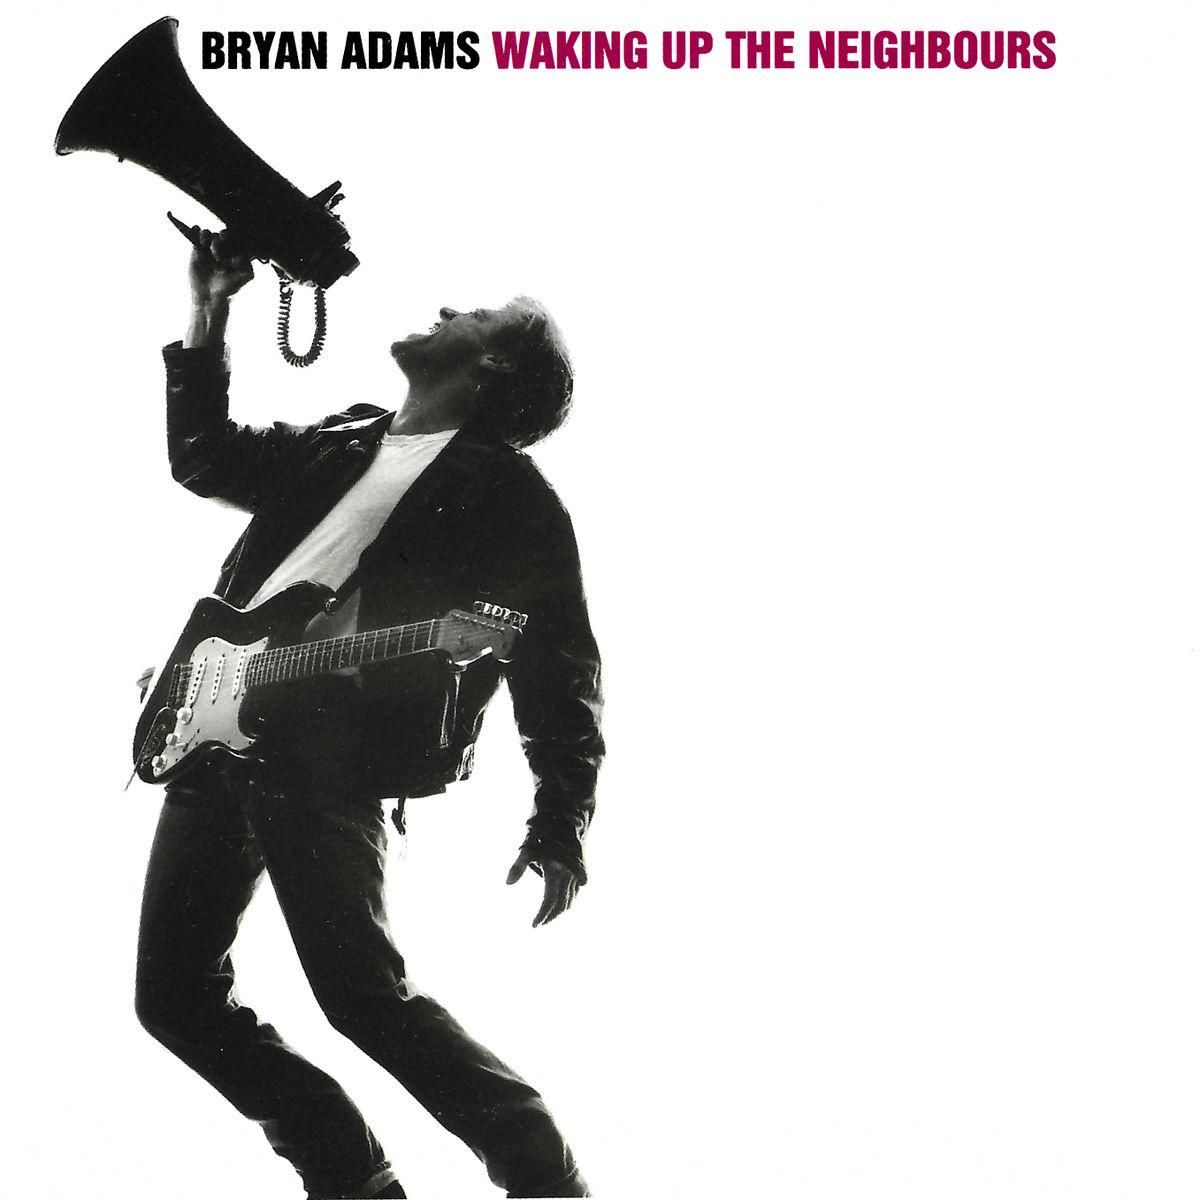 http://hitparade.ch/cdimages/bryan_adams-waking_up_the_neighbours_a.jpg